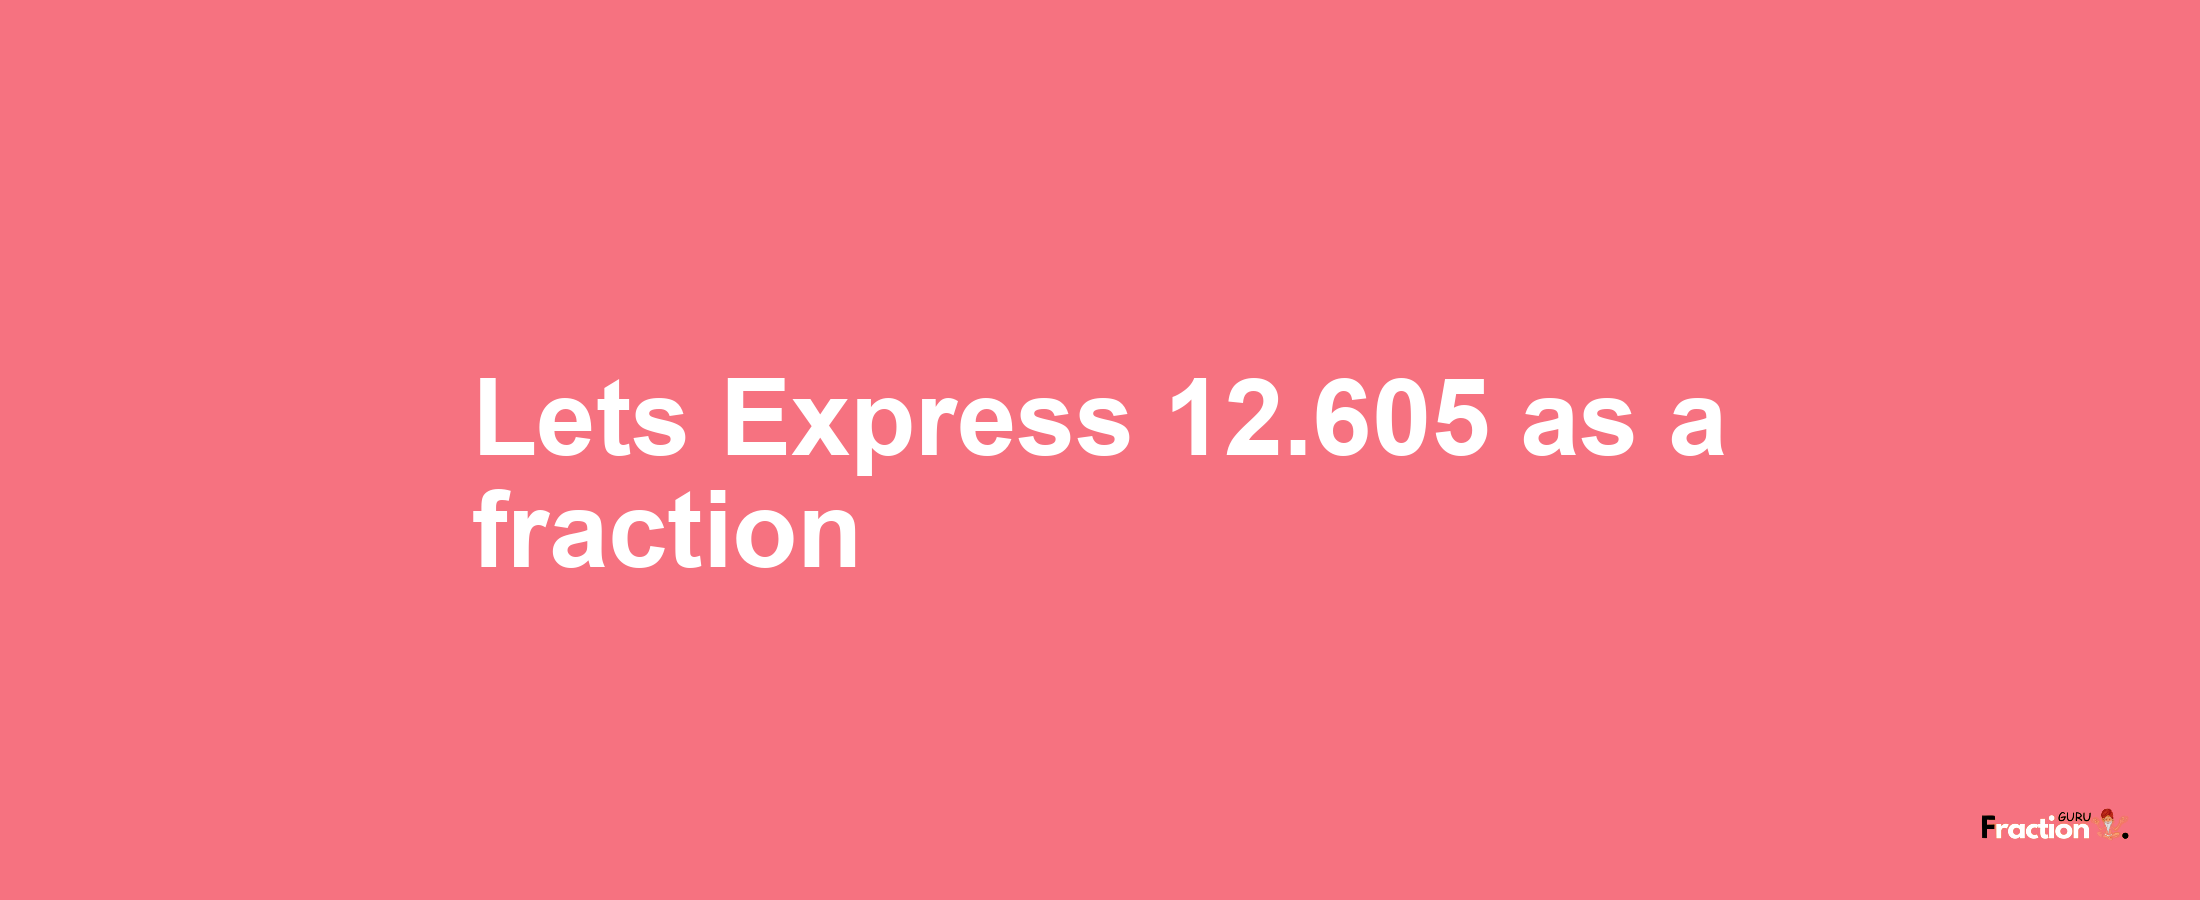 Lets Express 12.605 as afraction